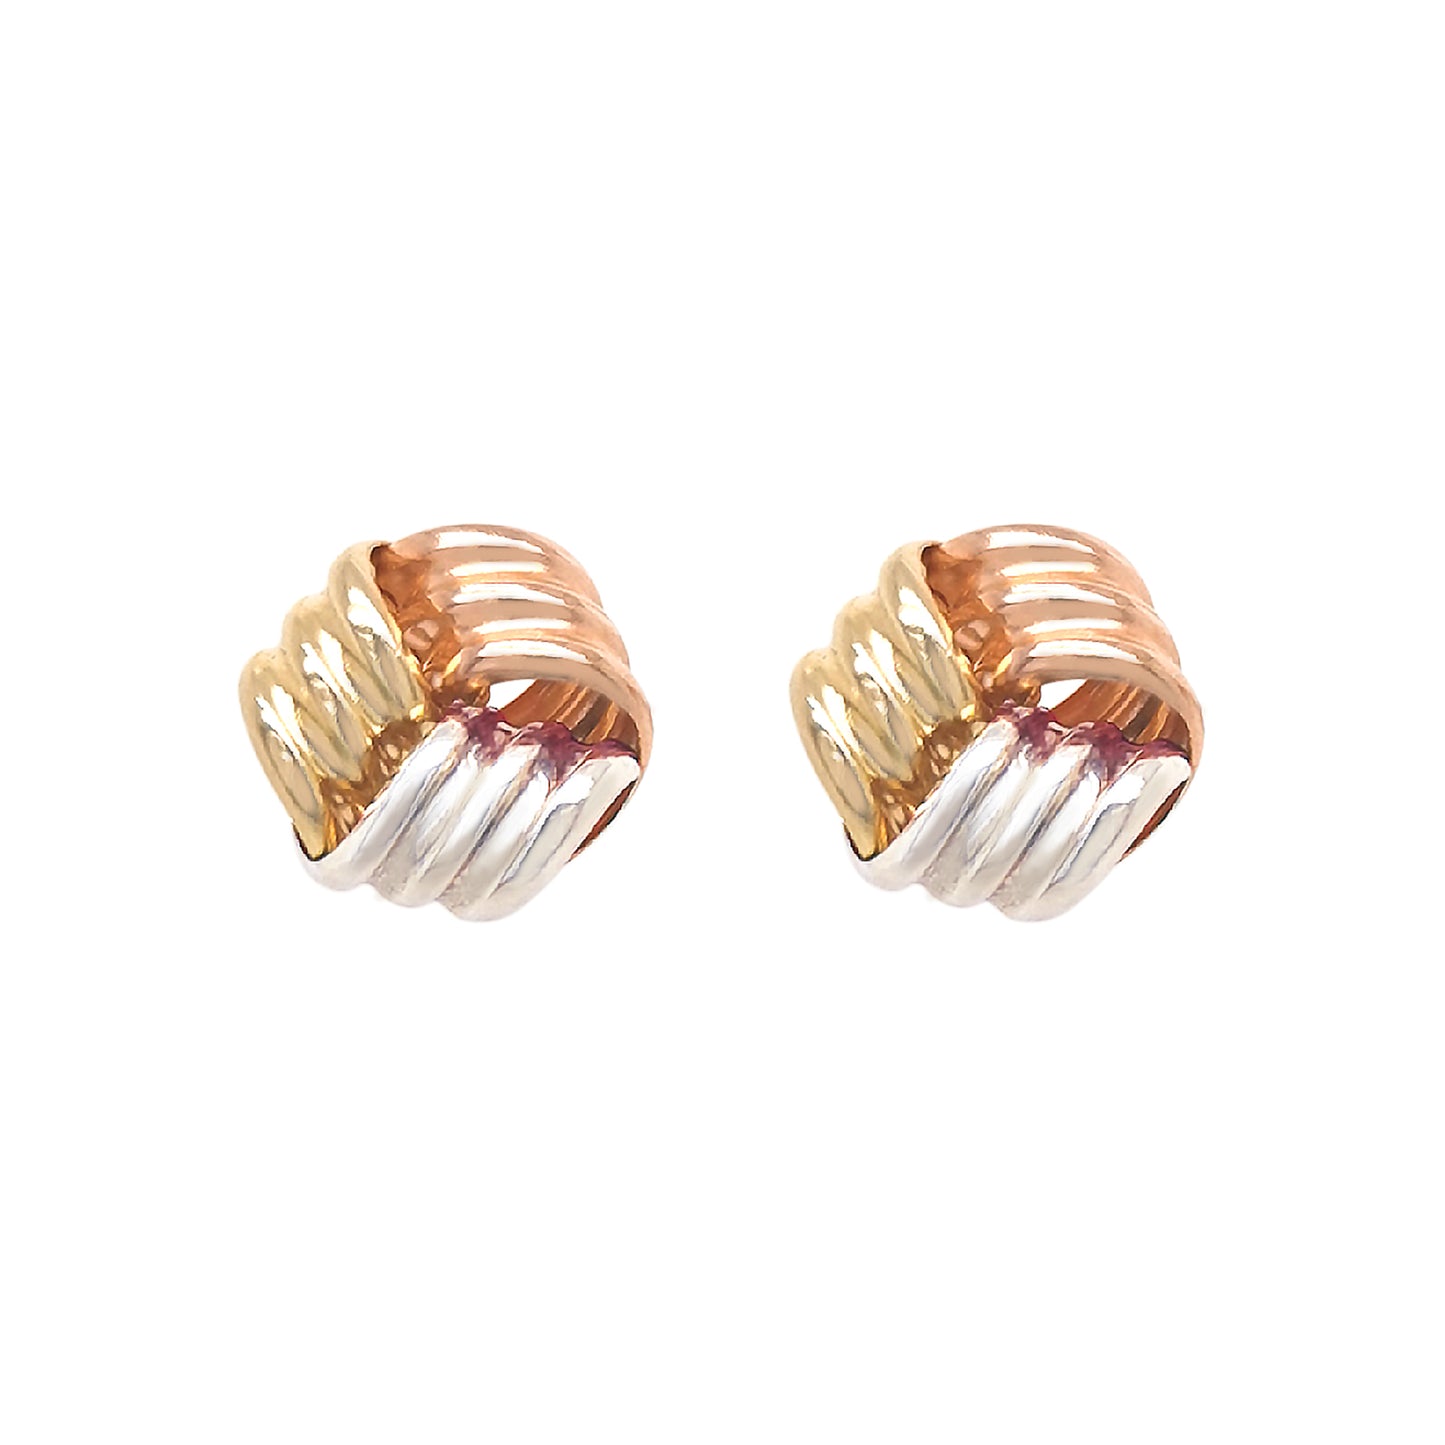 9ct Tri-Coloured Knot Style Stud Earrings